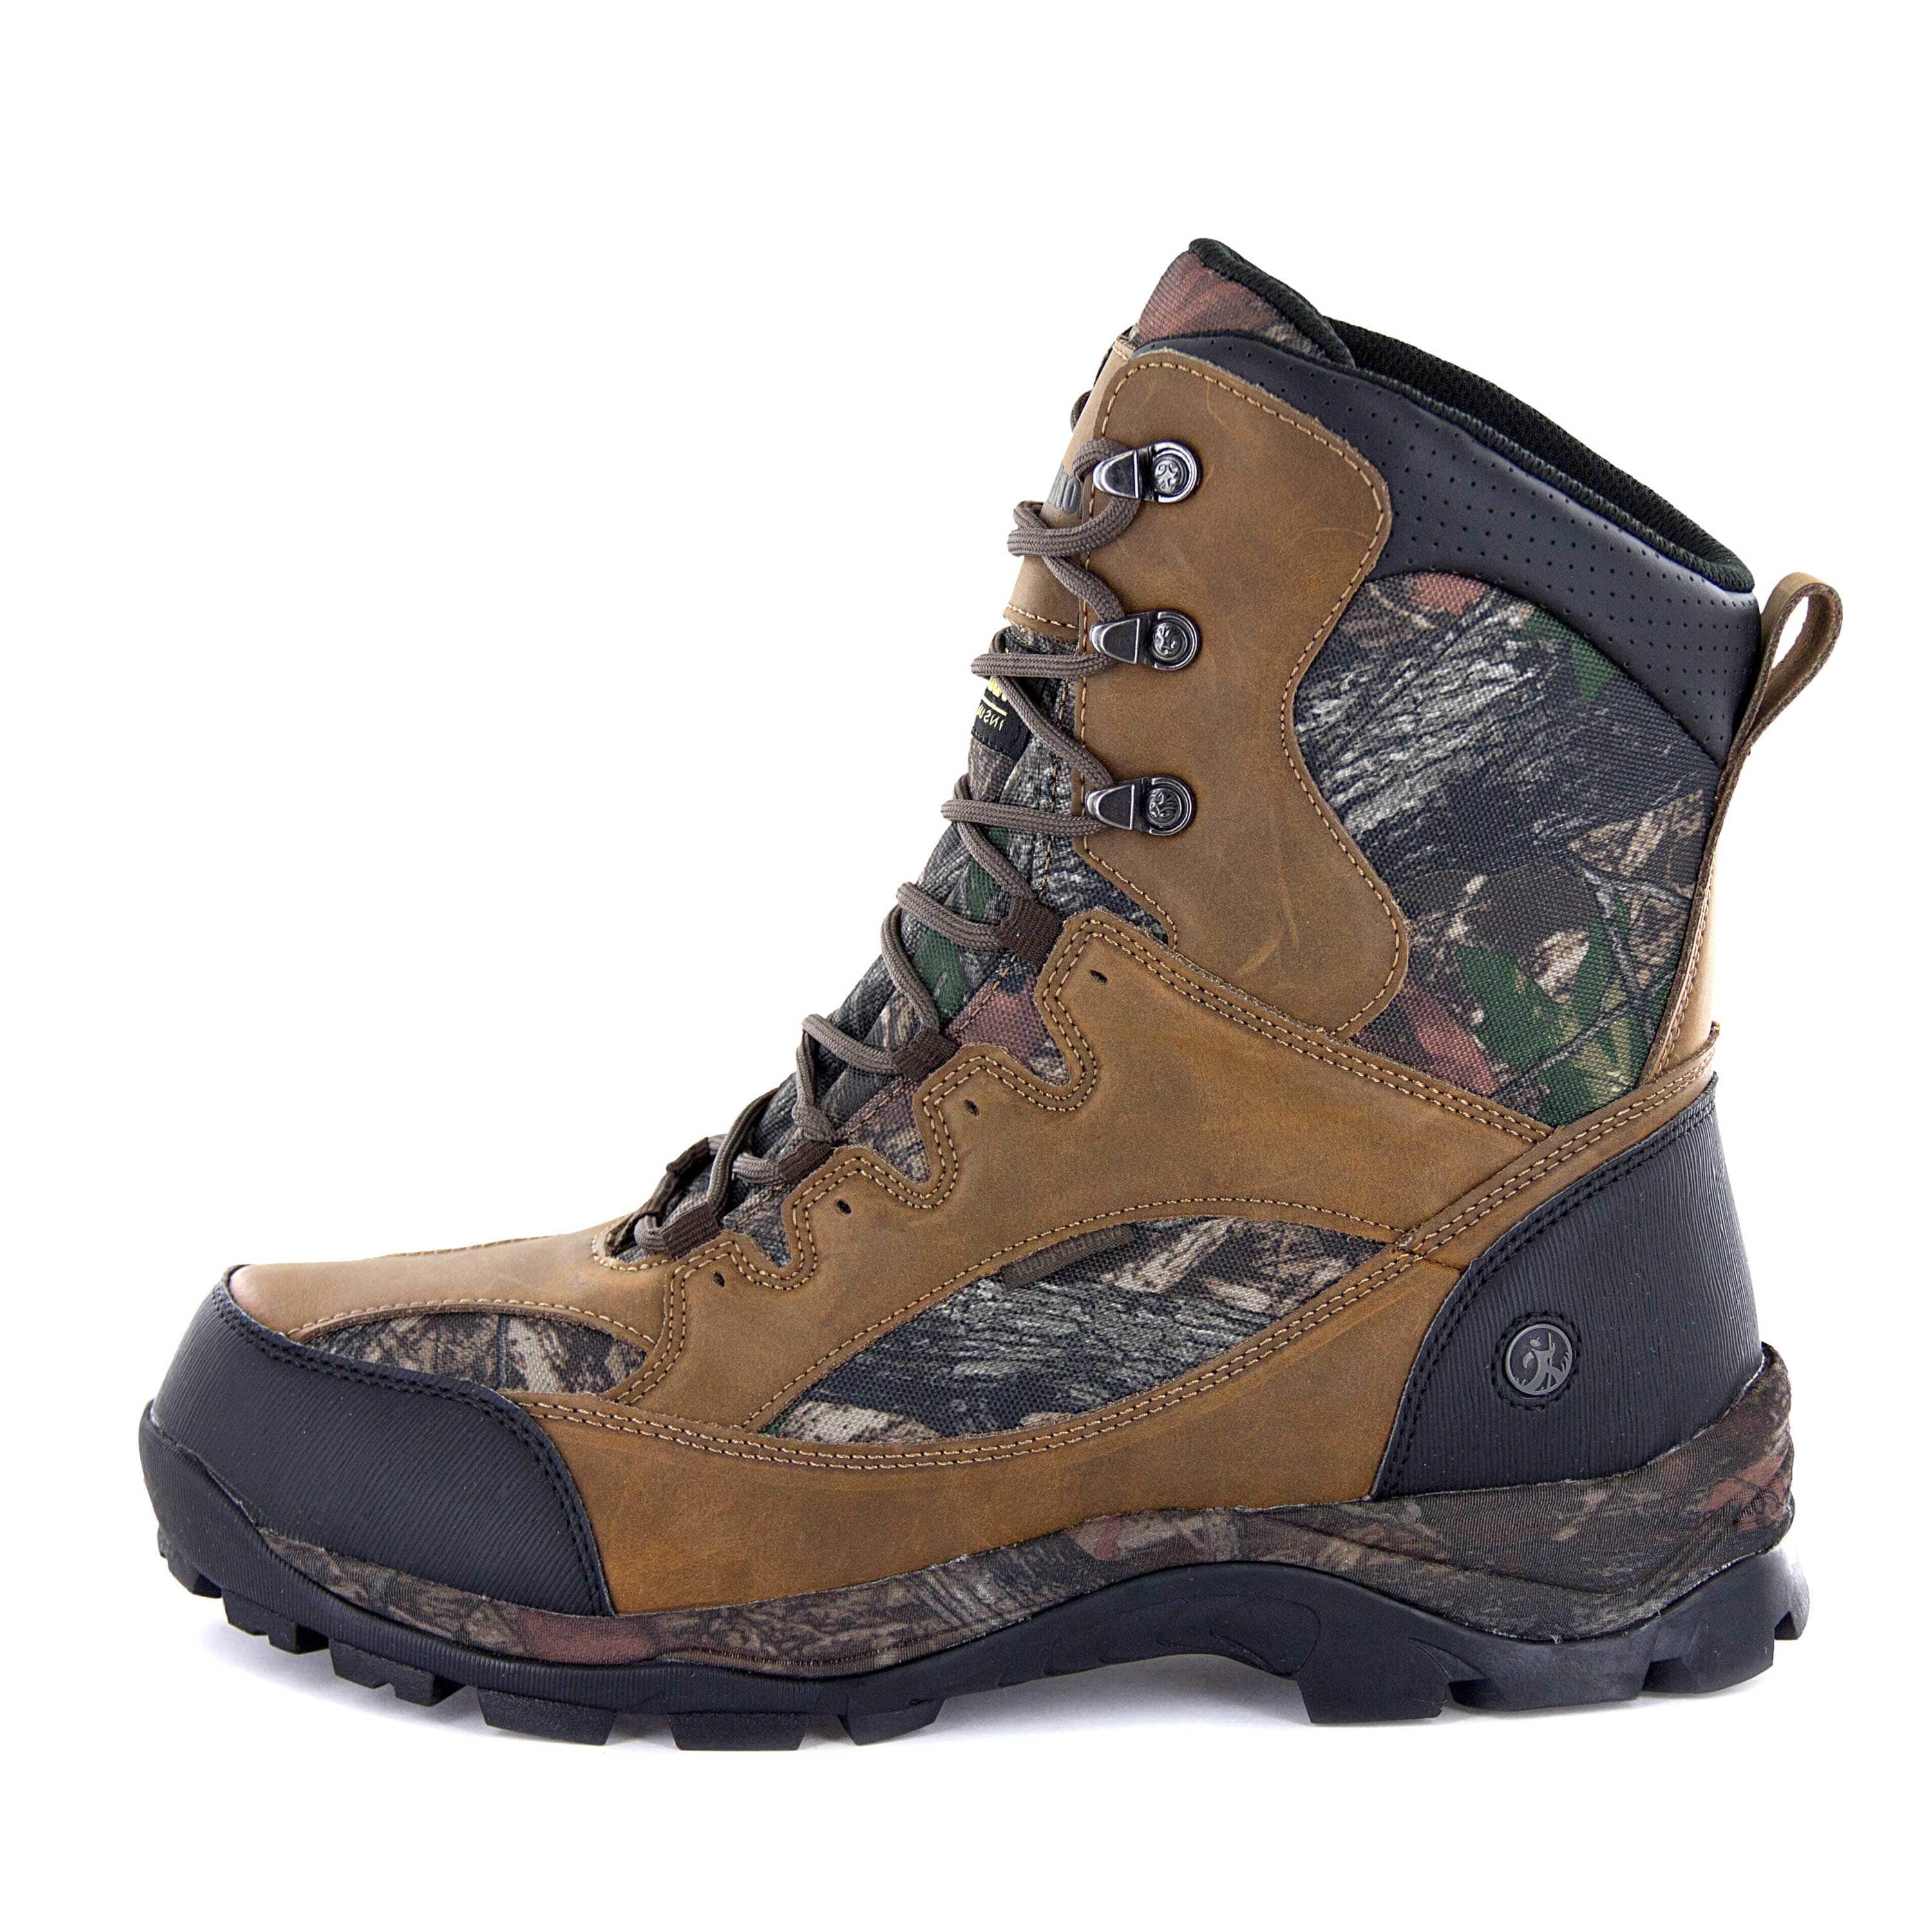 Mens Renegade 400 Insulated Waterproof Hunting Boot - Northside USA